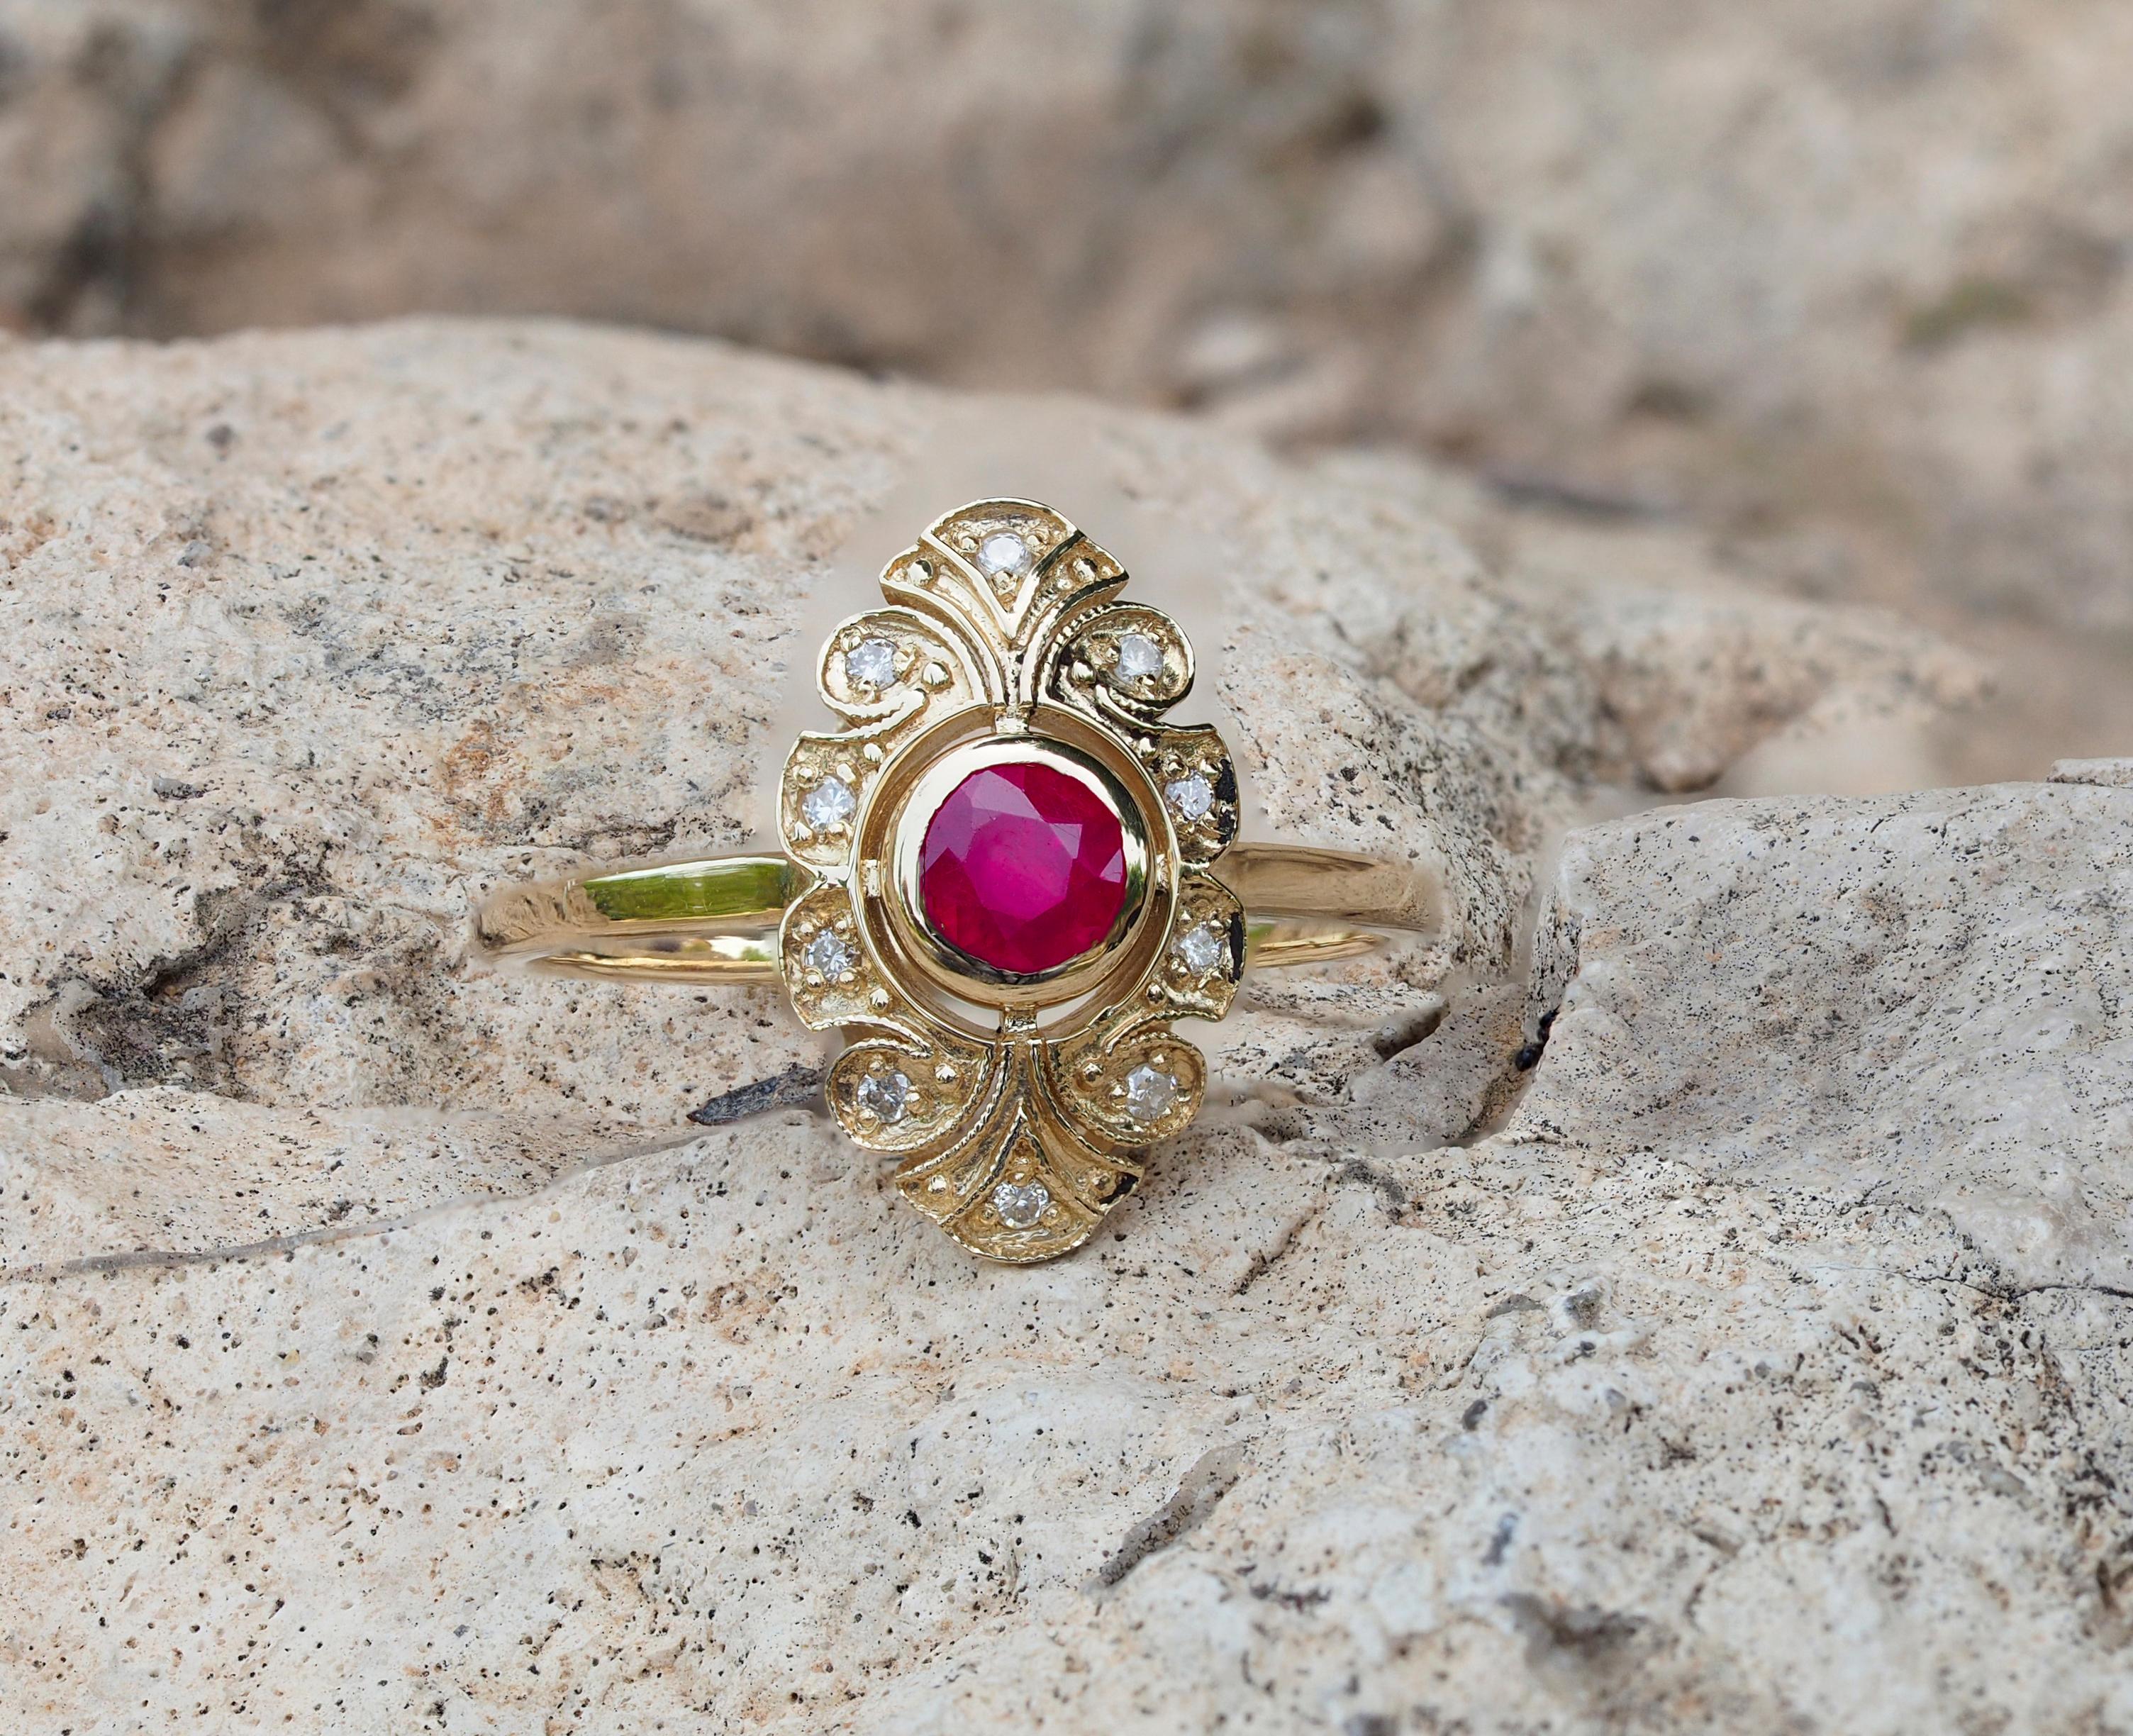 14 karat gold ring with ruby and diamonds. July birthstone ruby ring
total weight 2.60 g  depends from size
Gemstones 
Round cabochon cut ruby, 0.45 ct., transparent with inclusions, red color
Diamonds 10x0.01-0.10 ct, H, Si , round brilliant cut